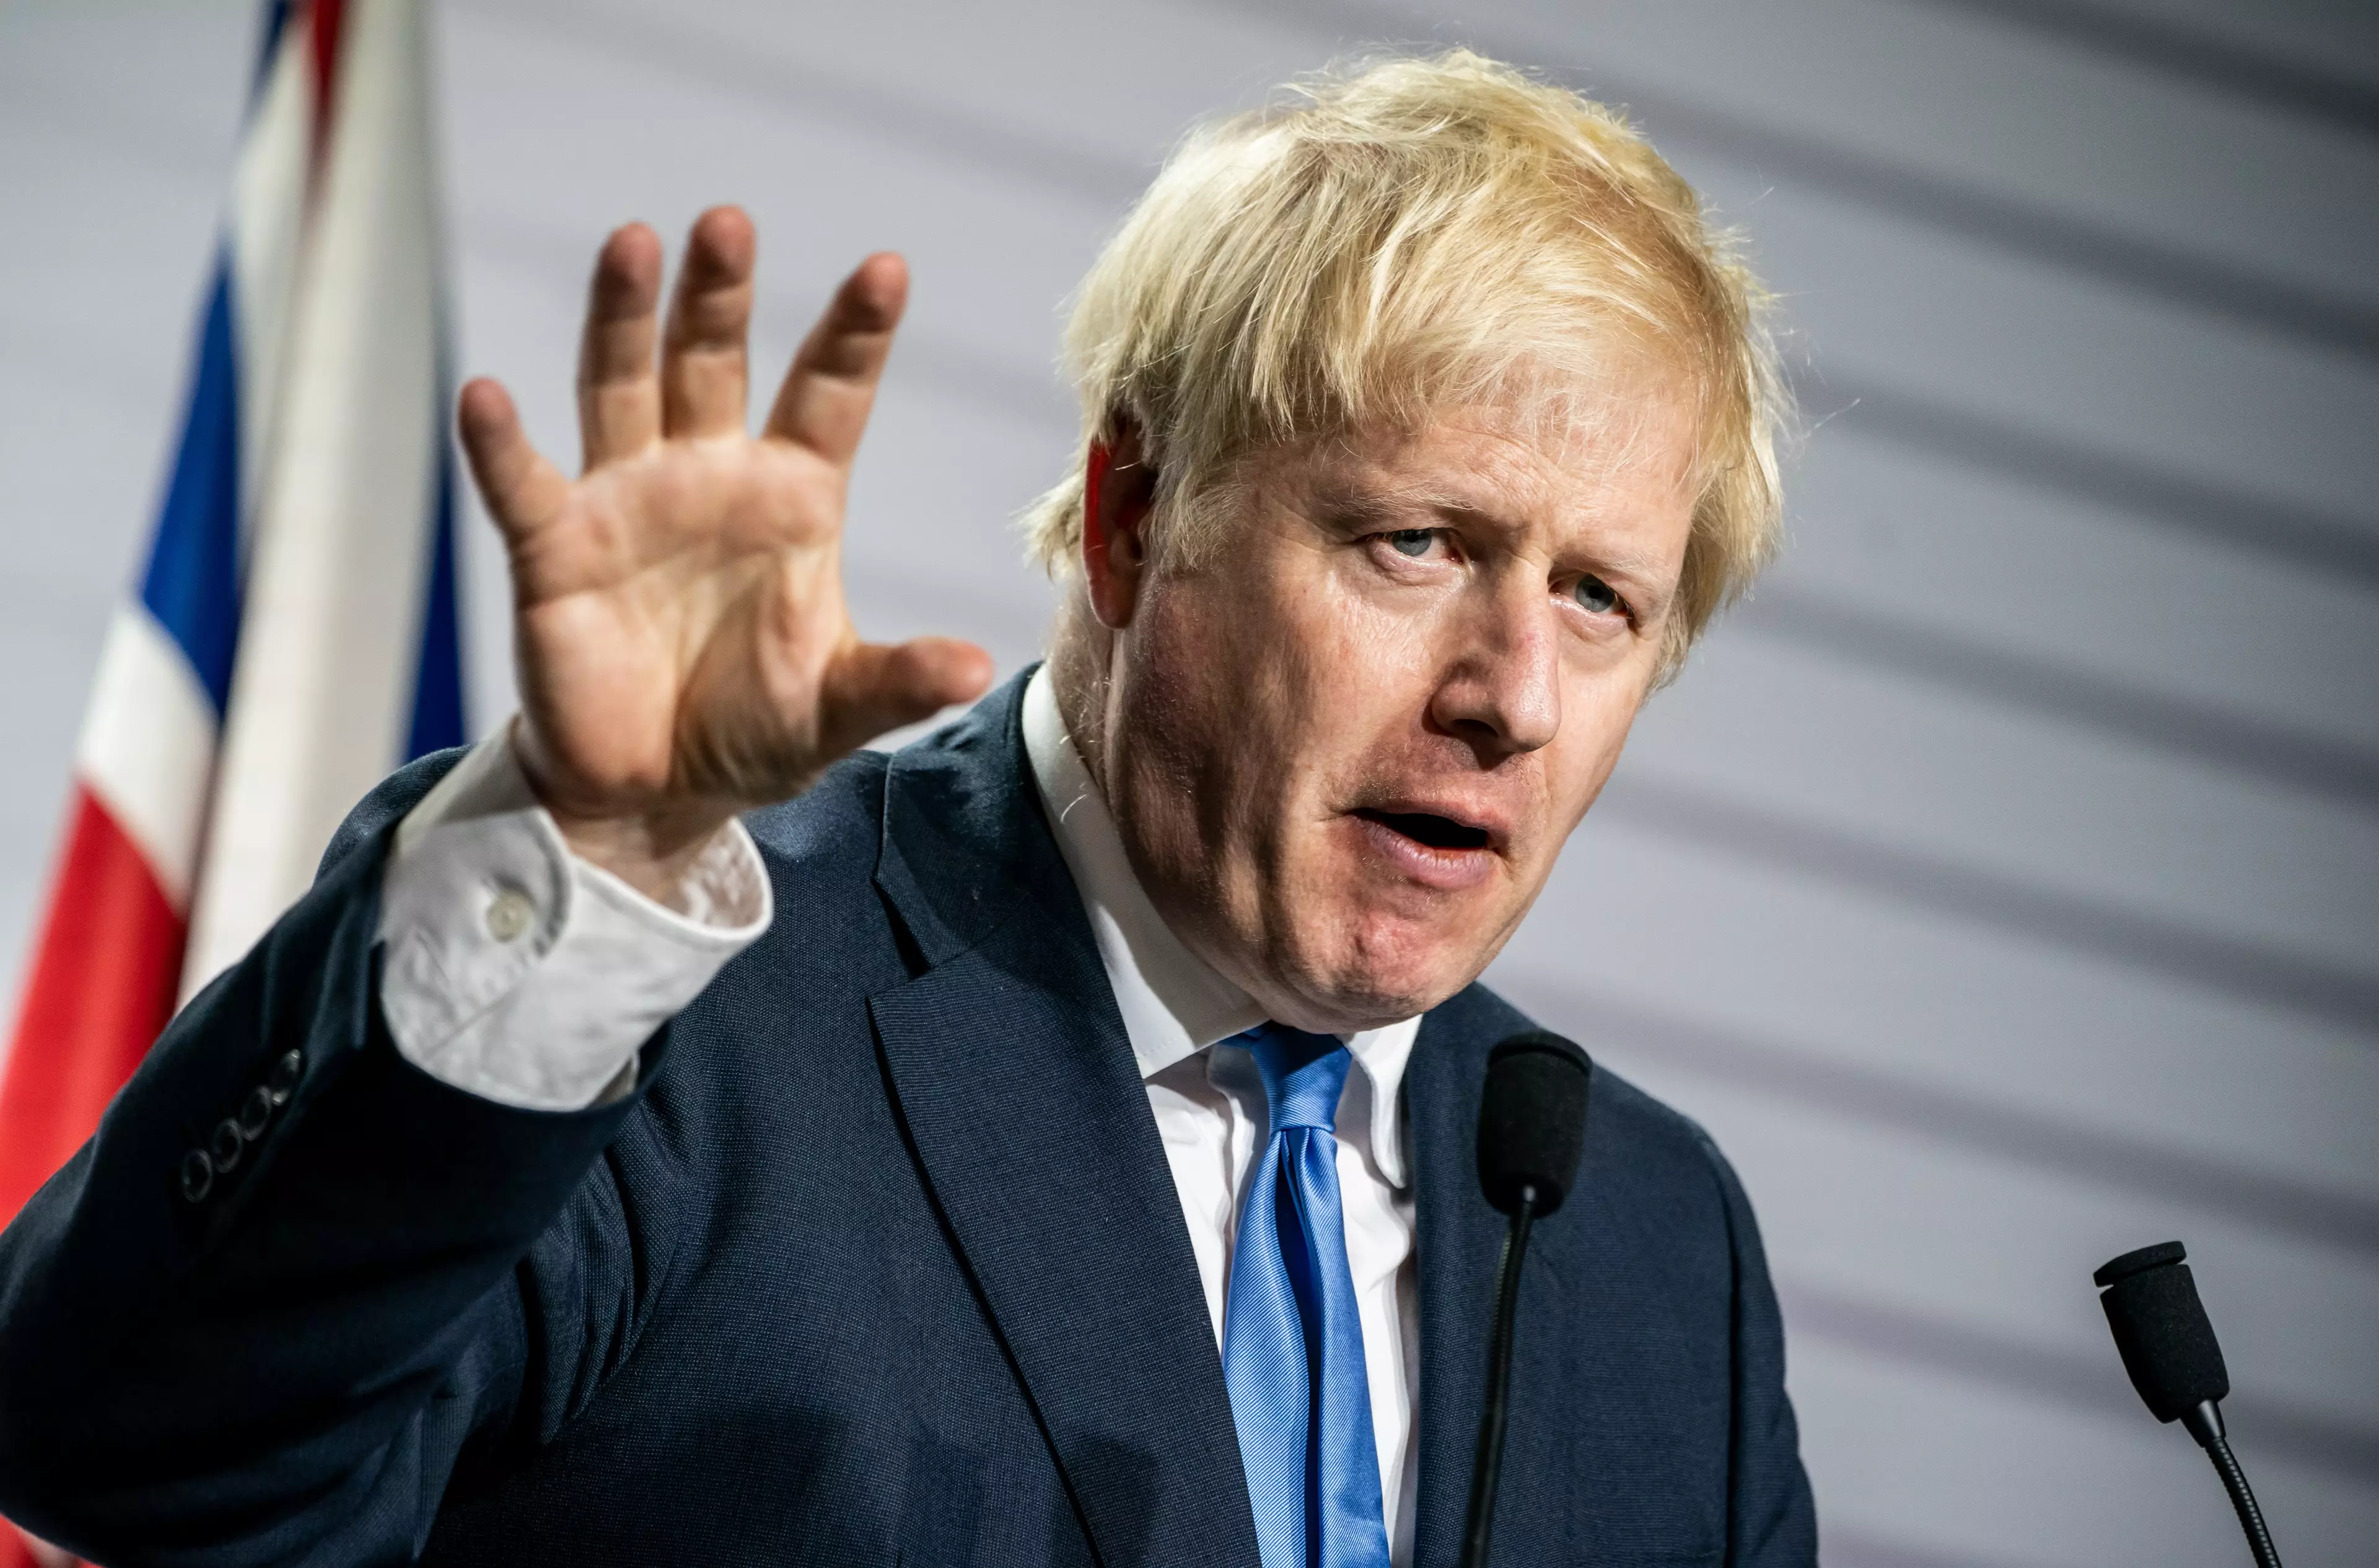 Boris Johnson plans to suspend Parliament from early September until October 14th.